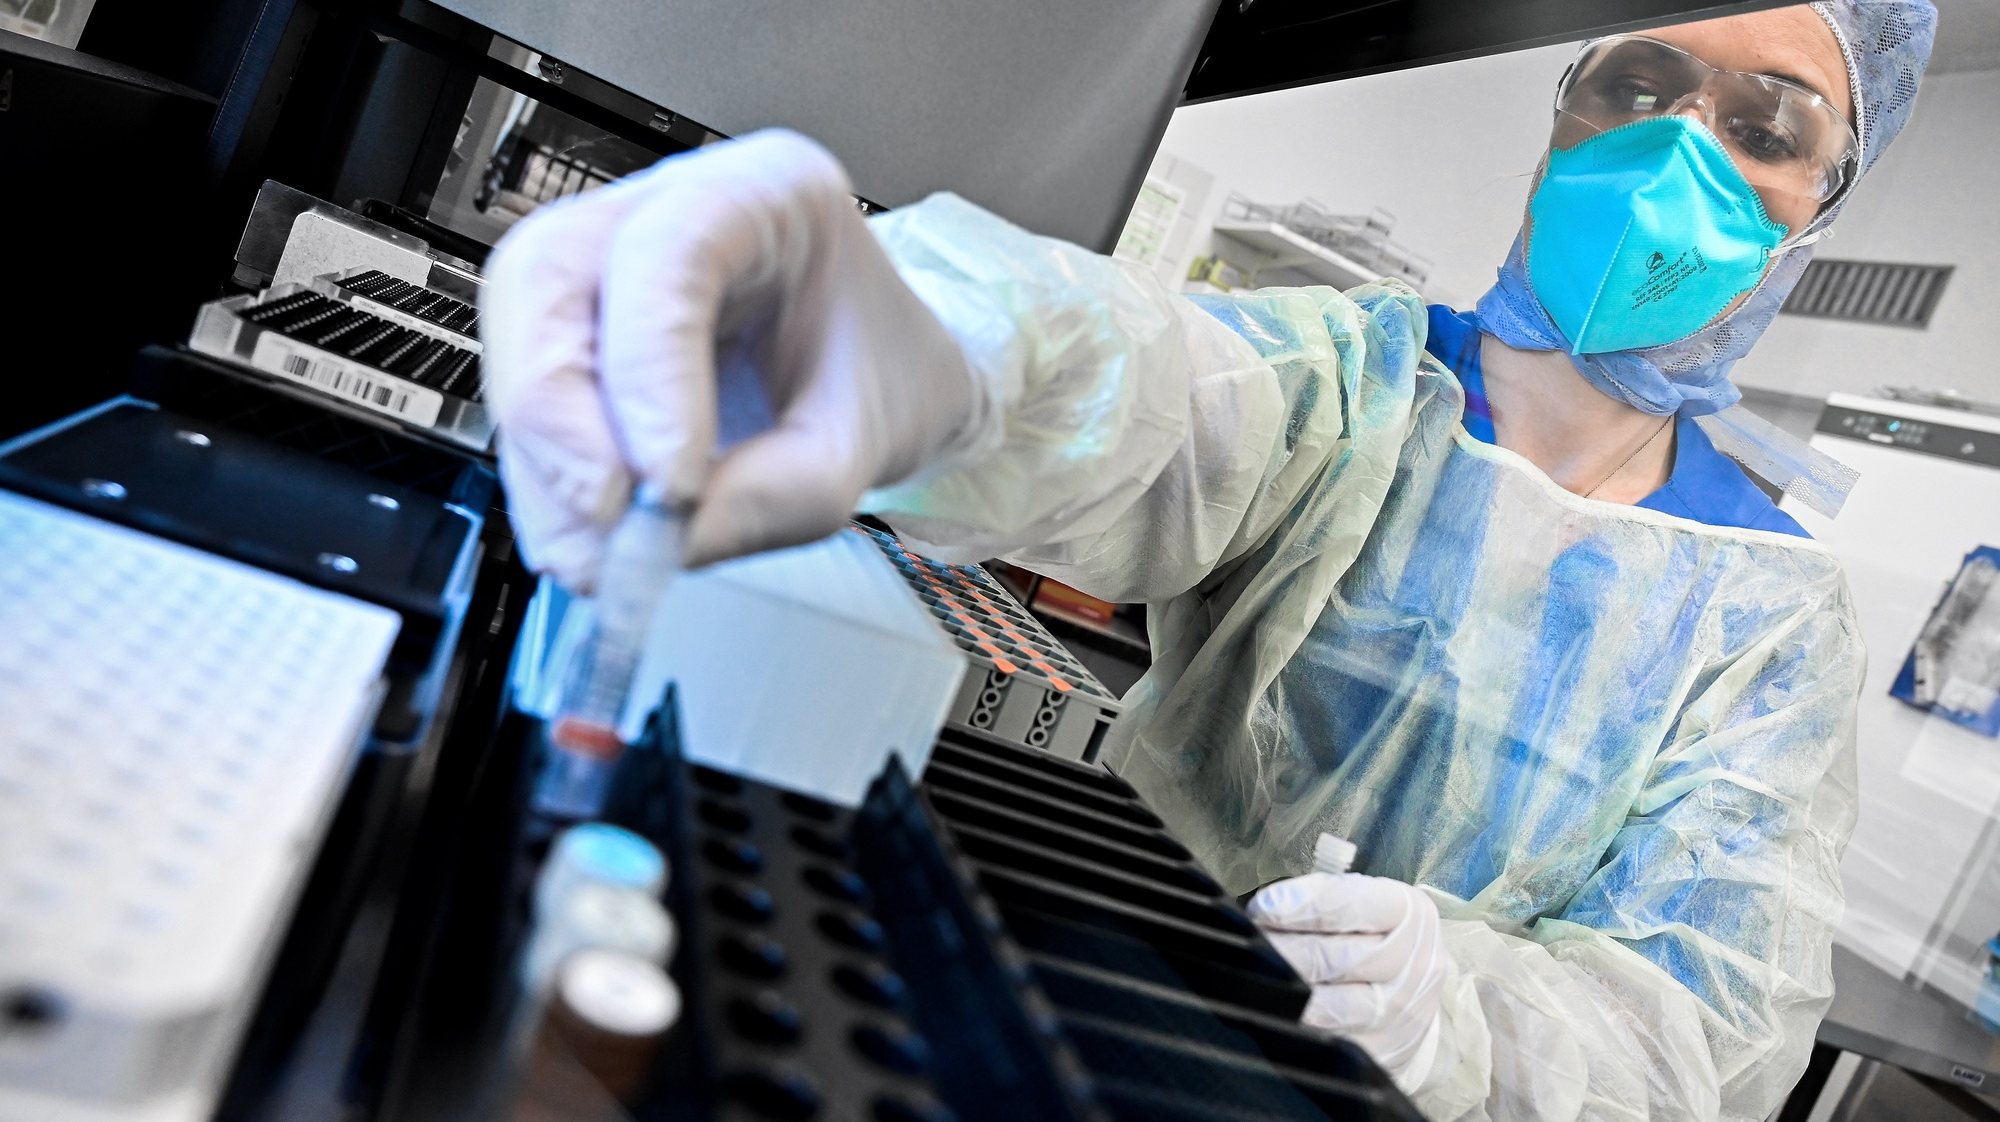 epa08338642 A molecular geneticist in protective clothing runs a test for SARS-CoV-2 coronavirus which causes the COVID-19 disease in a hospital lab in the Rhineland Region, Germany, 01 April 2020 (issued 02 April 2020). Countries around the world are taking increased measures to stem the widespread of the SARS-CoV-2 coronavirus which causes the COVID-19 disease.  EPA/SASCHA STEINBACH ATTENTION: This Image is part of a PHOTO SET